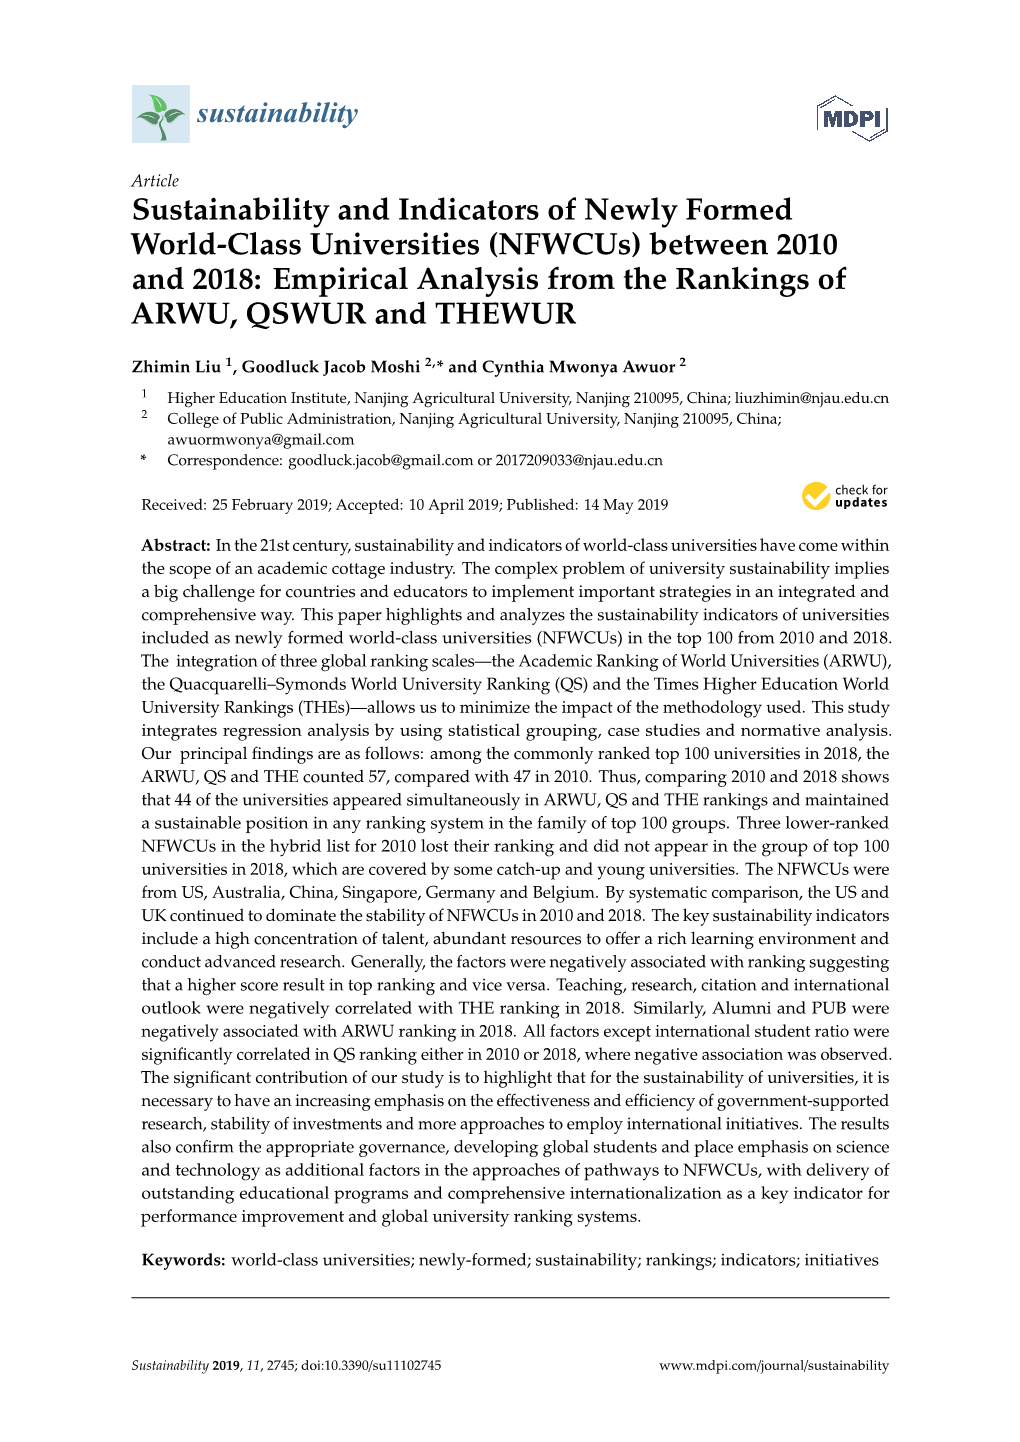 Sustainability and Indicators of Newly Formed World-Class Universities (Nfwcus) Between 2010 and 2018: Empirical Analysis from the Rankings of ARWU, QSWUR and THEWUR